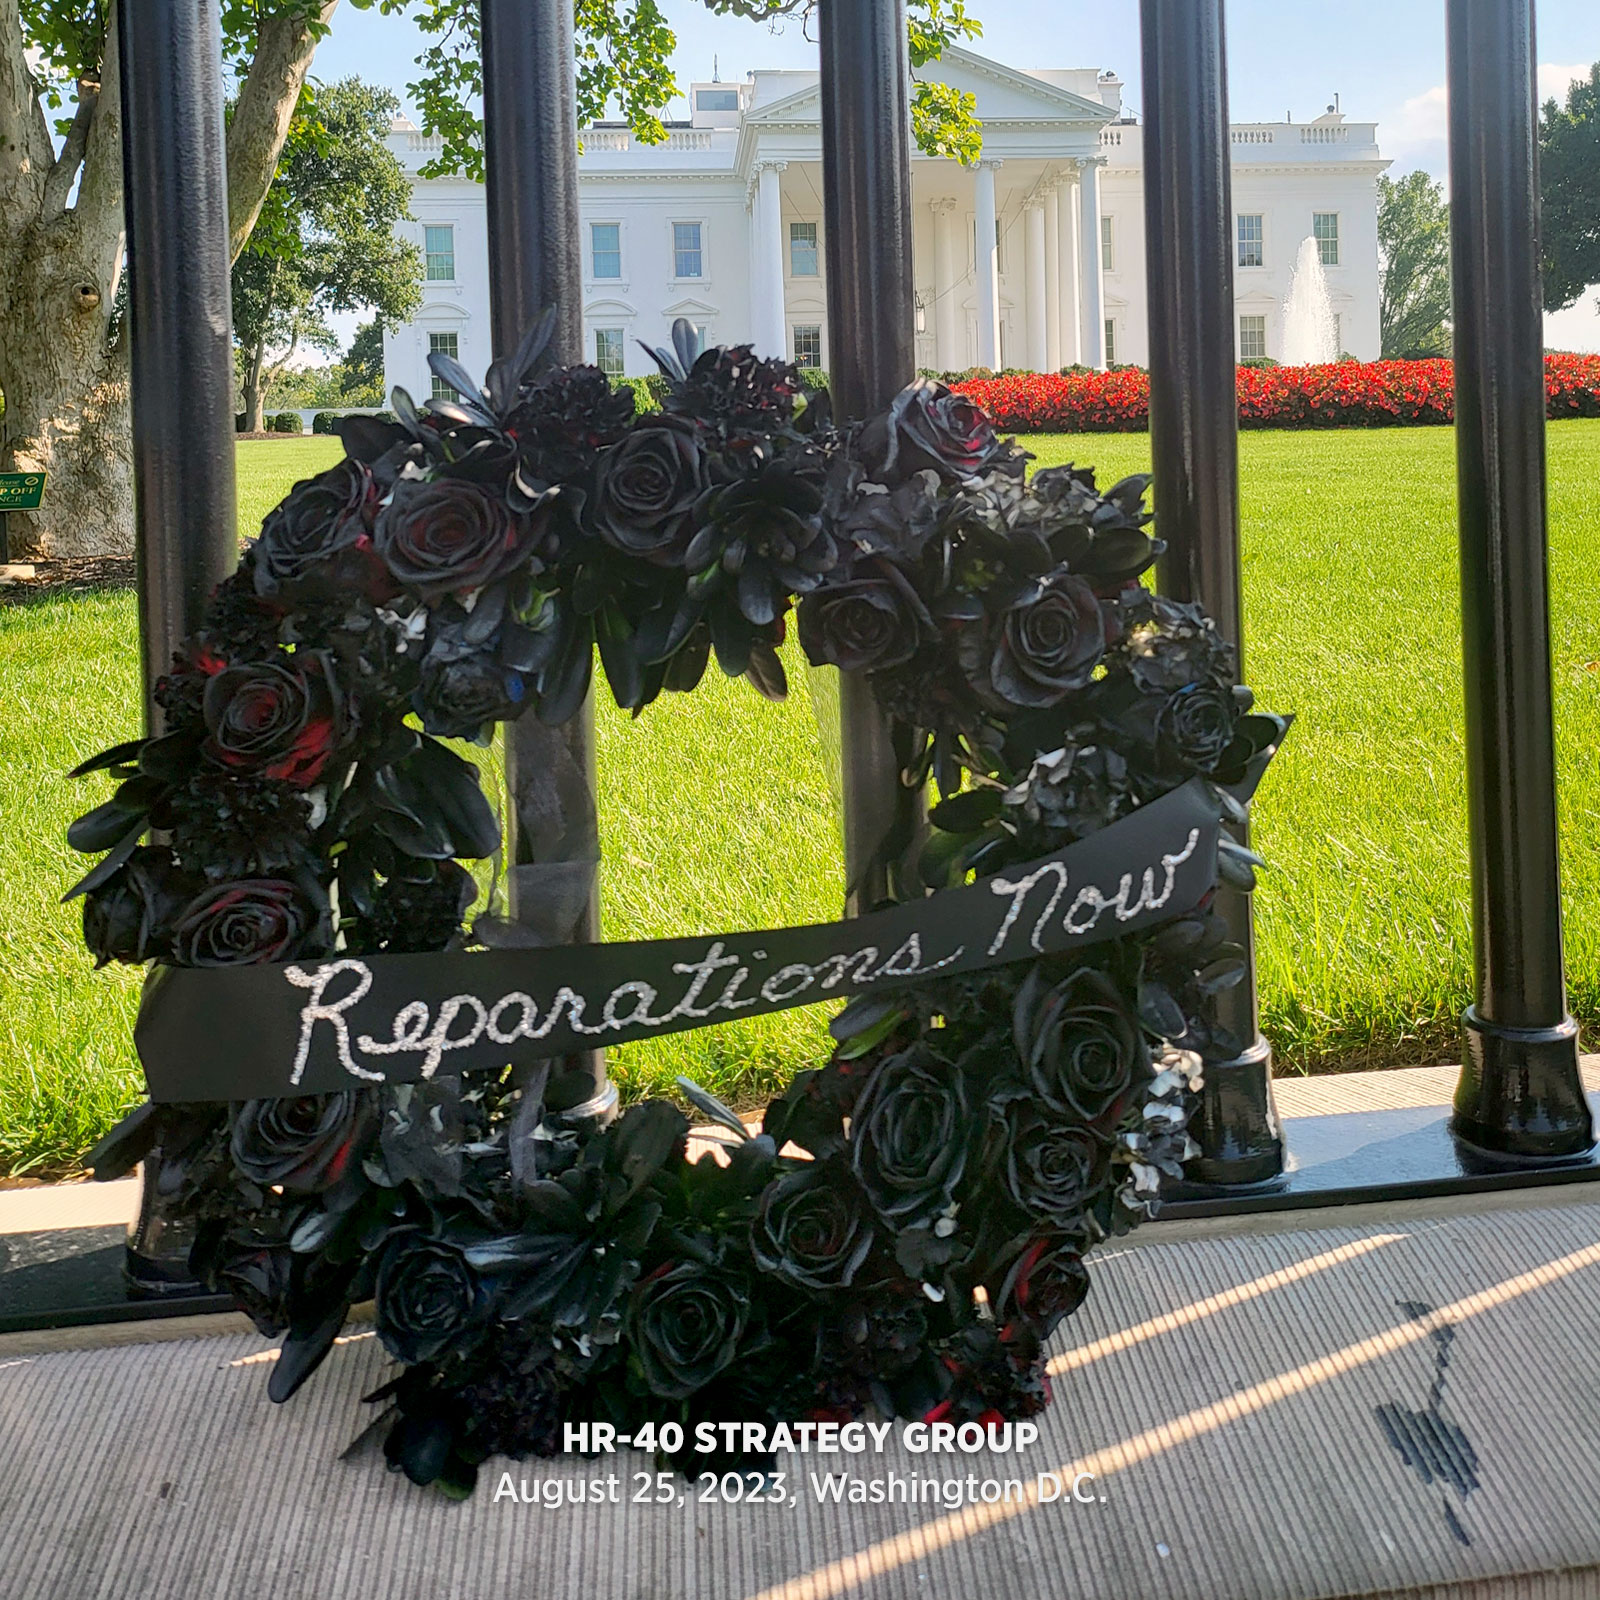 REPARATIONS NOW WREATH - HR-40 Strategy Group August 25, 2023 Washington D.C.HR-40 Strategy Group August 25, 2023 Washington D.C.